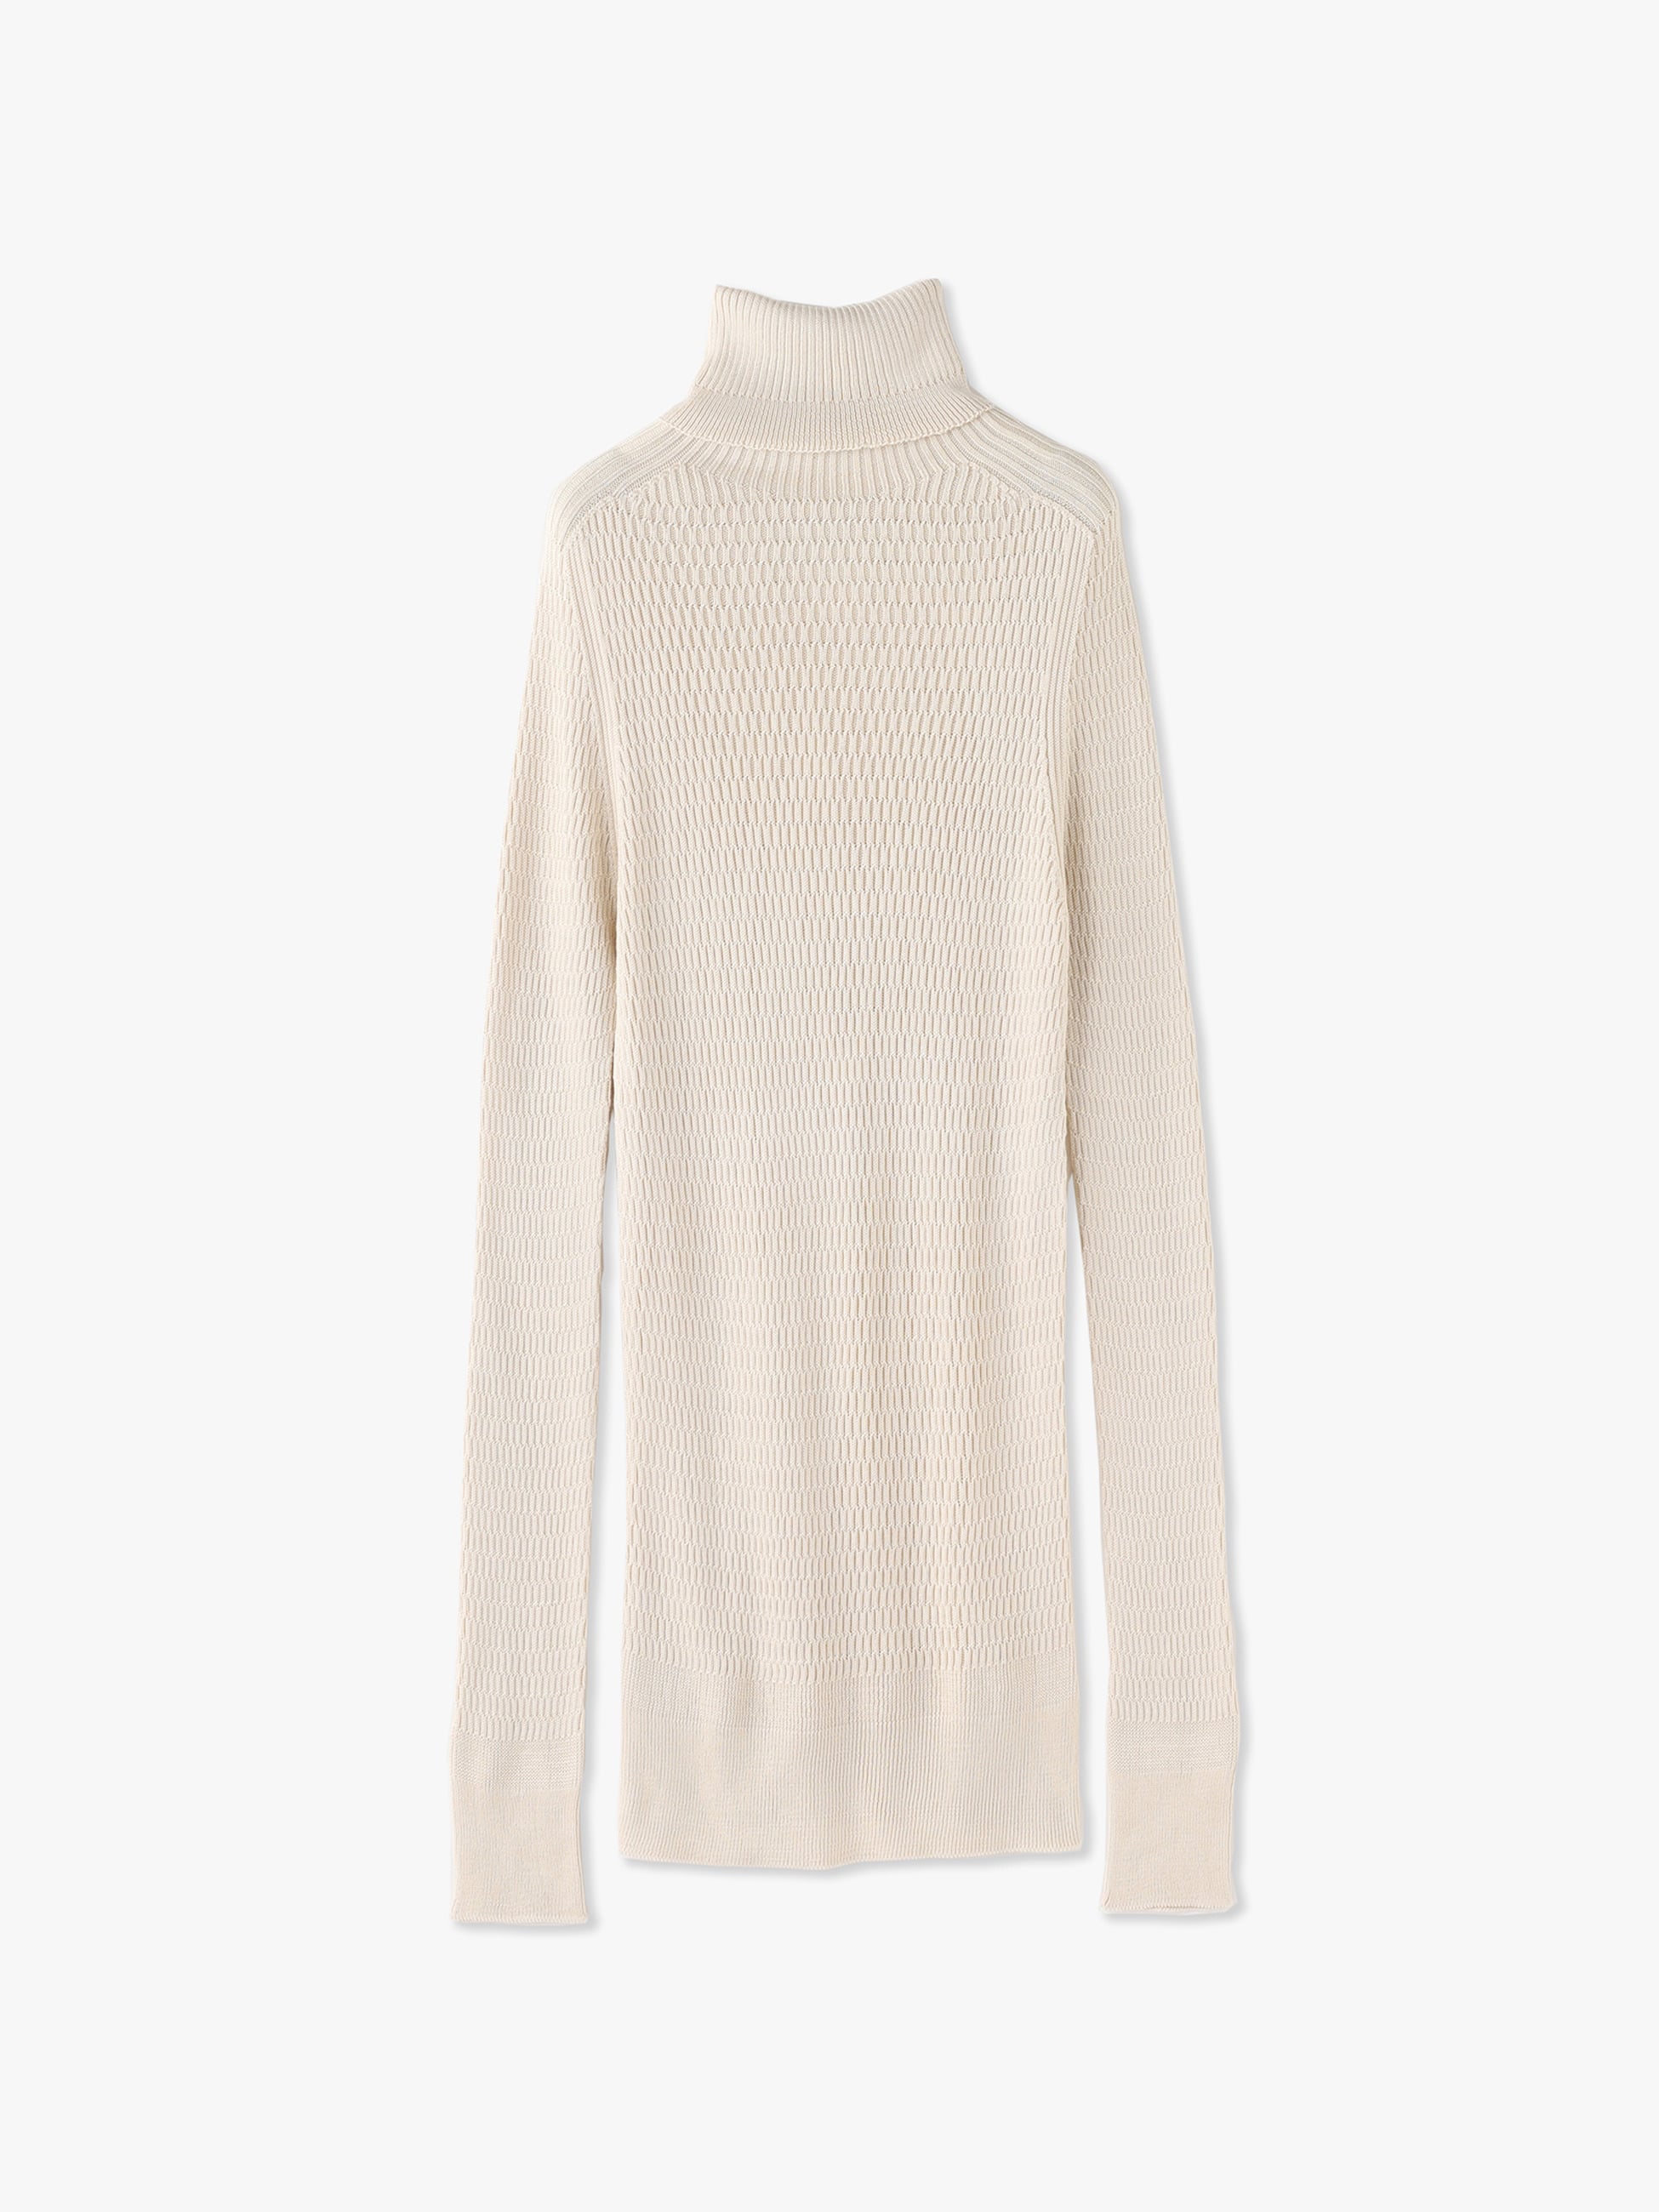 Honeycomb Knit Turtle Neck Pullover｜UNION LAUNCH(ユニオンランチ 